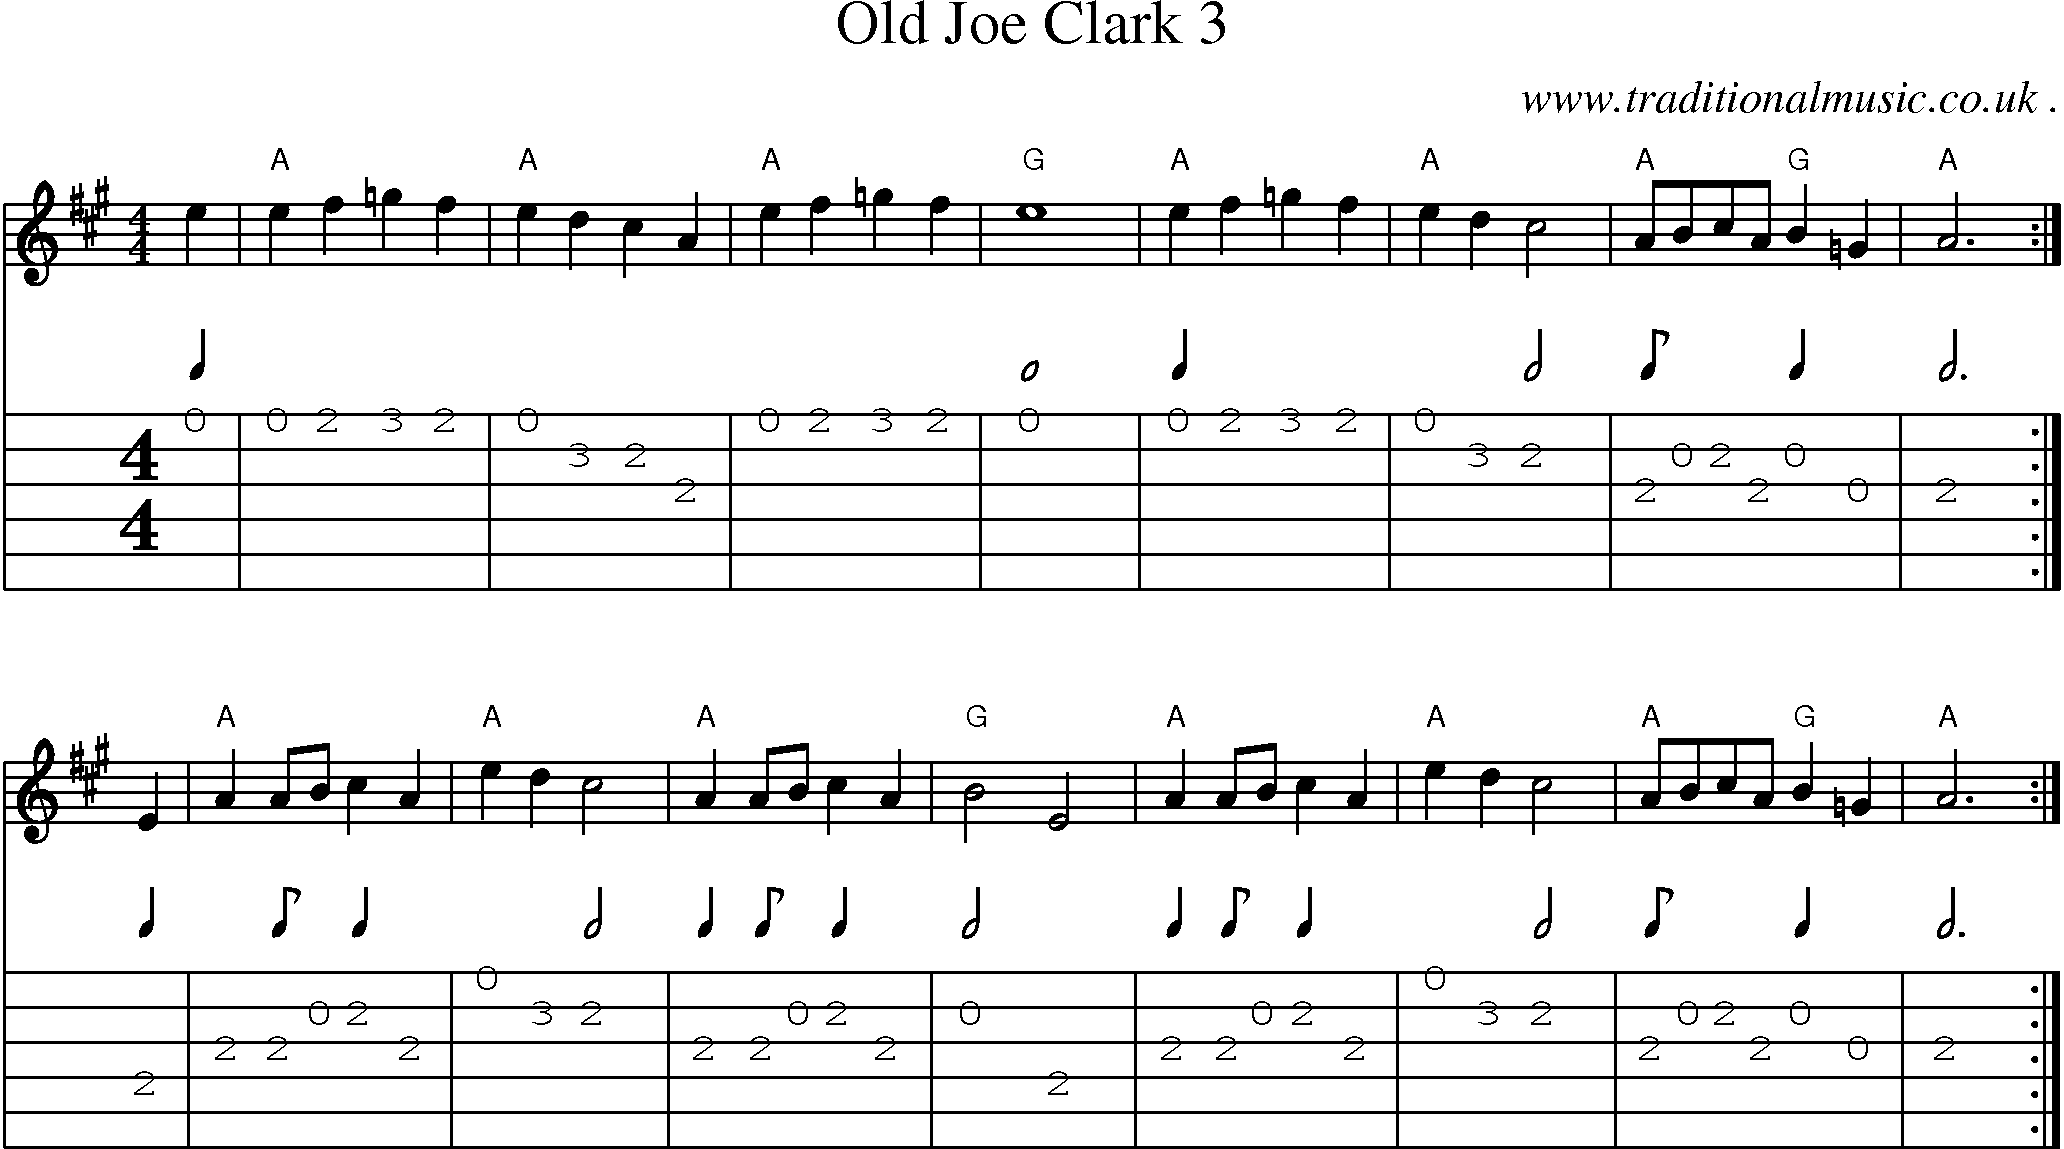 Music Score and Guitar Tabs for Old Joe Clark 3